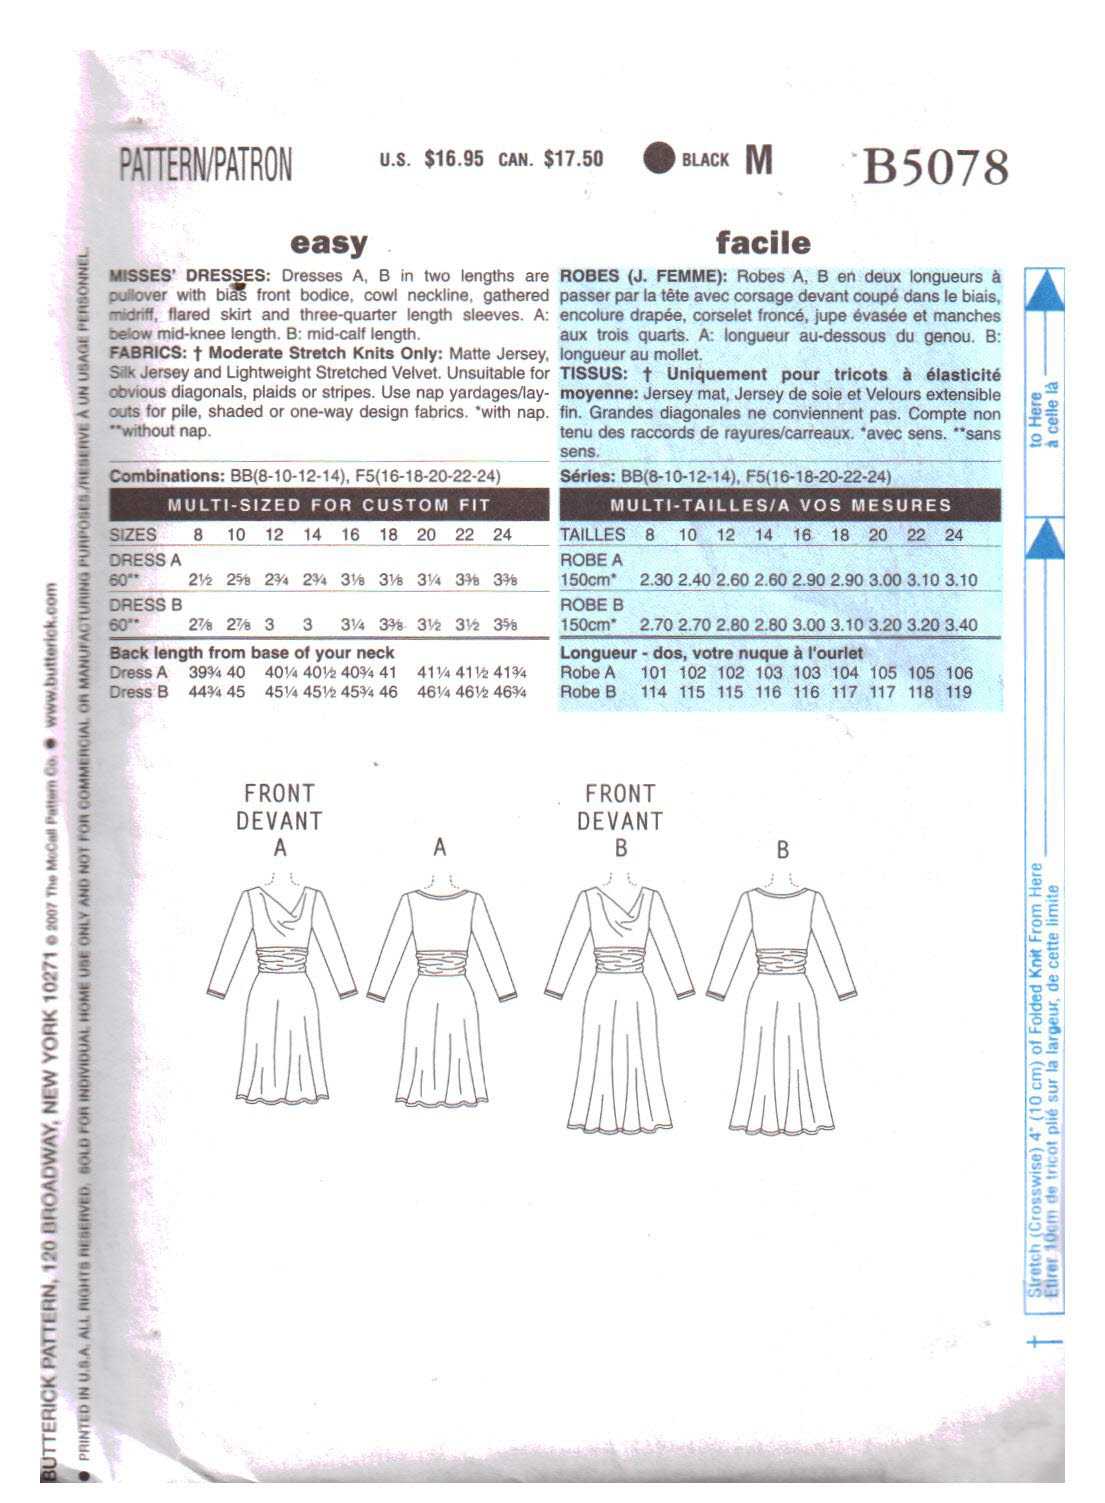 Fab OOP BUTTERICK DW2 5472 MS/MP Fitted Bias Dress PATTERN 6-8-10/12-14-16 UC